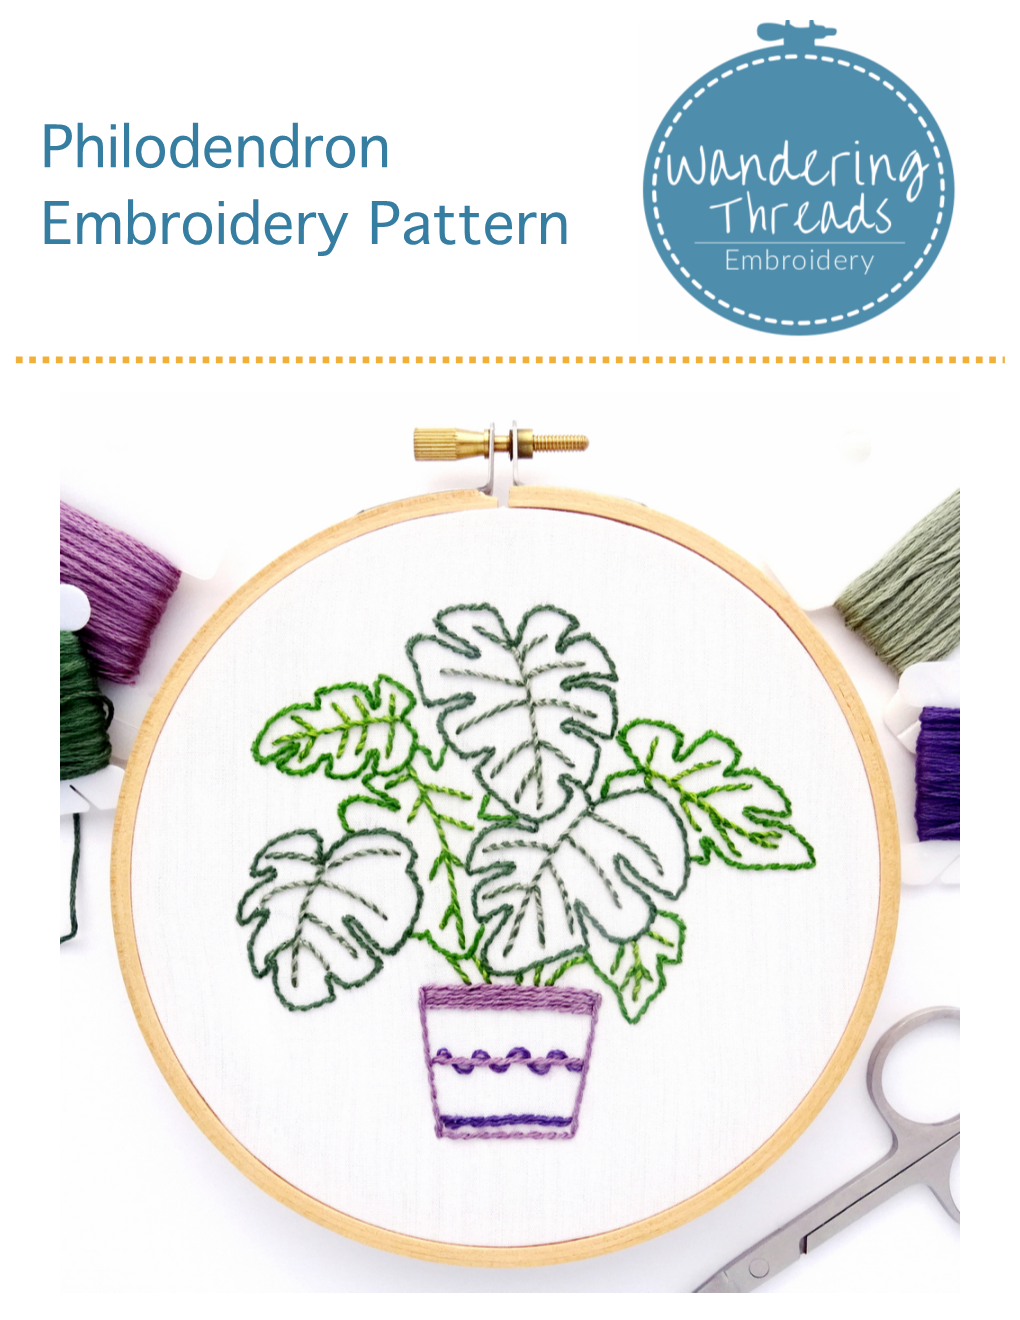 FREE Philodendron Pattern and Happy Stitching!